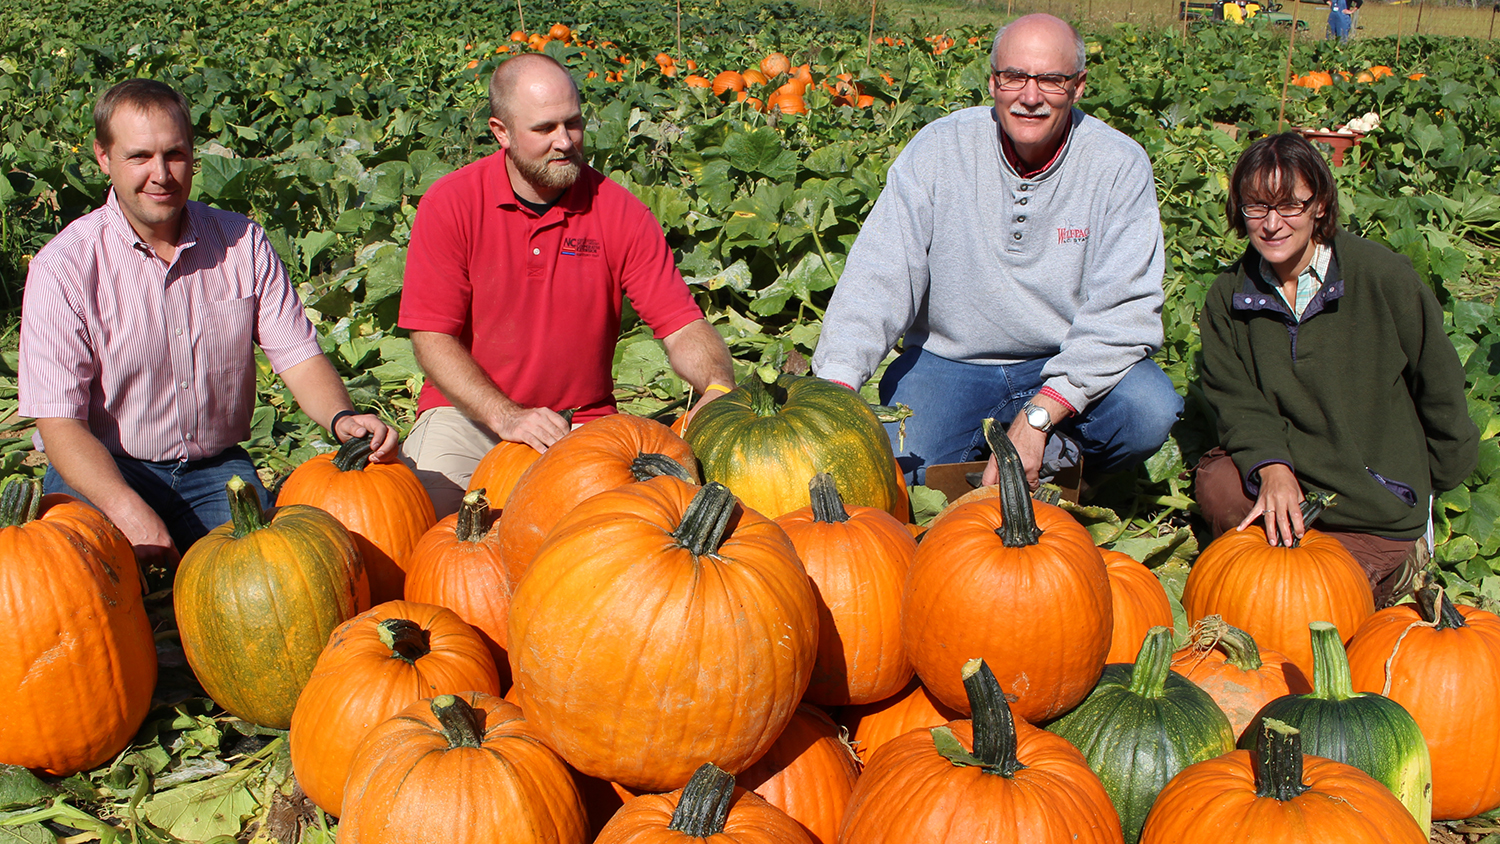 Kaleb Rathbone, Travis Birdsell, Jonathan Schultheis and Annette Wszelaki pose with pumpkins in a research station field.